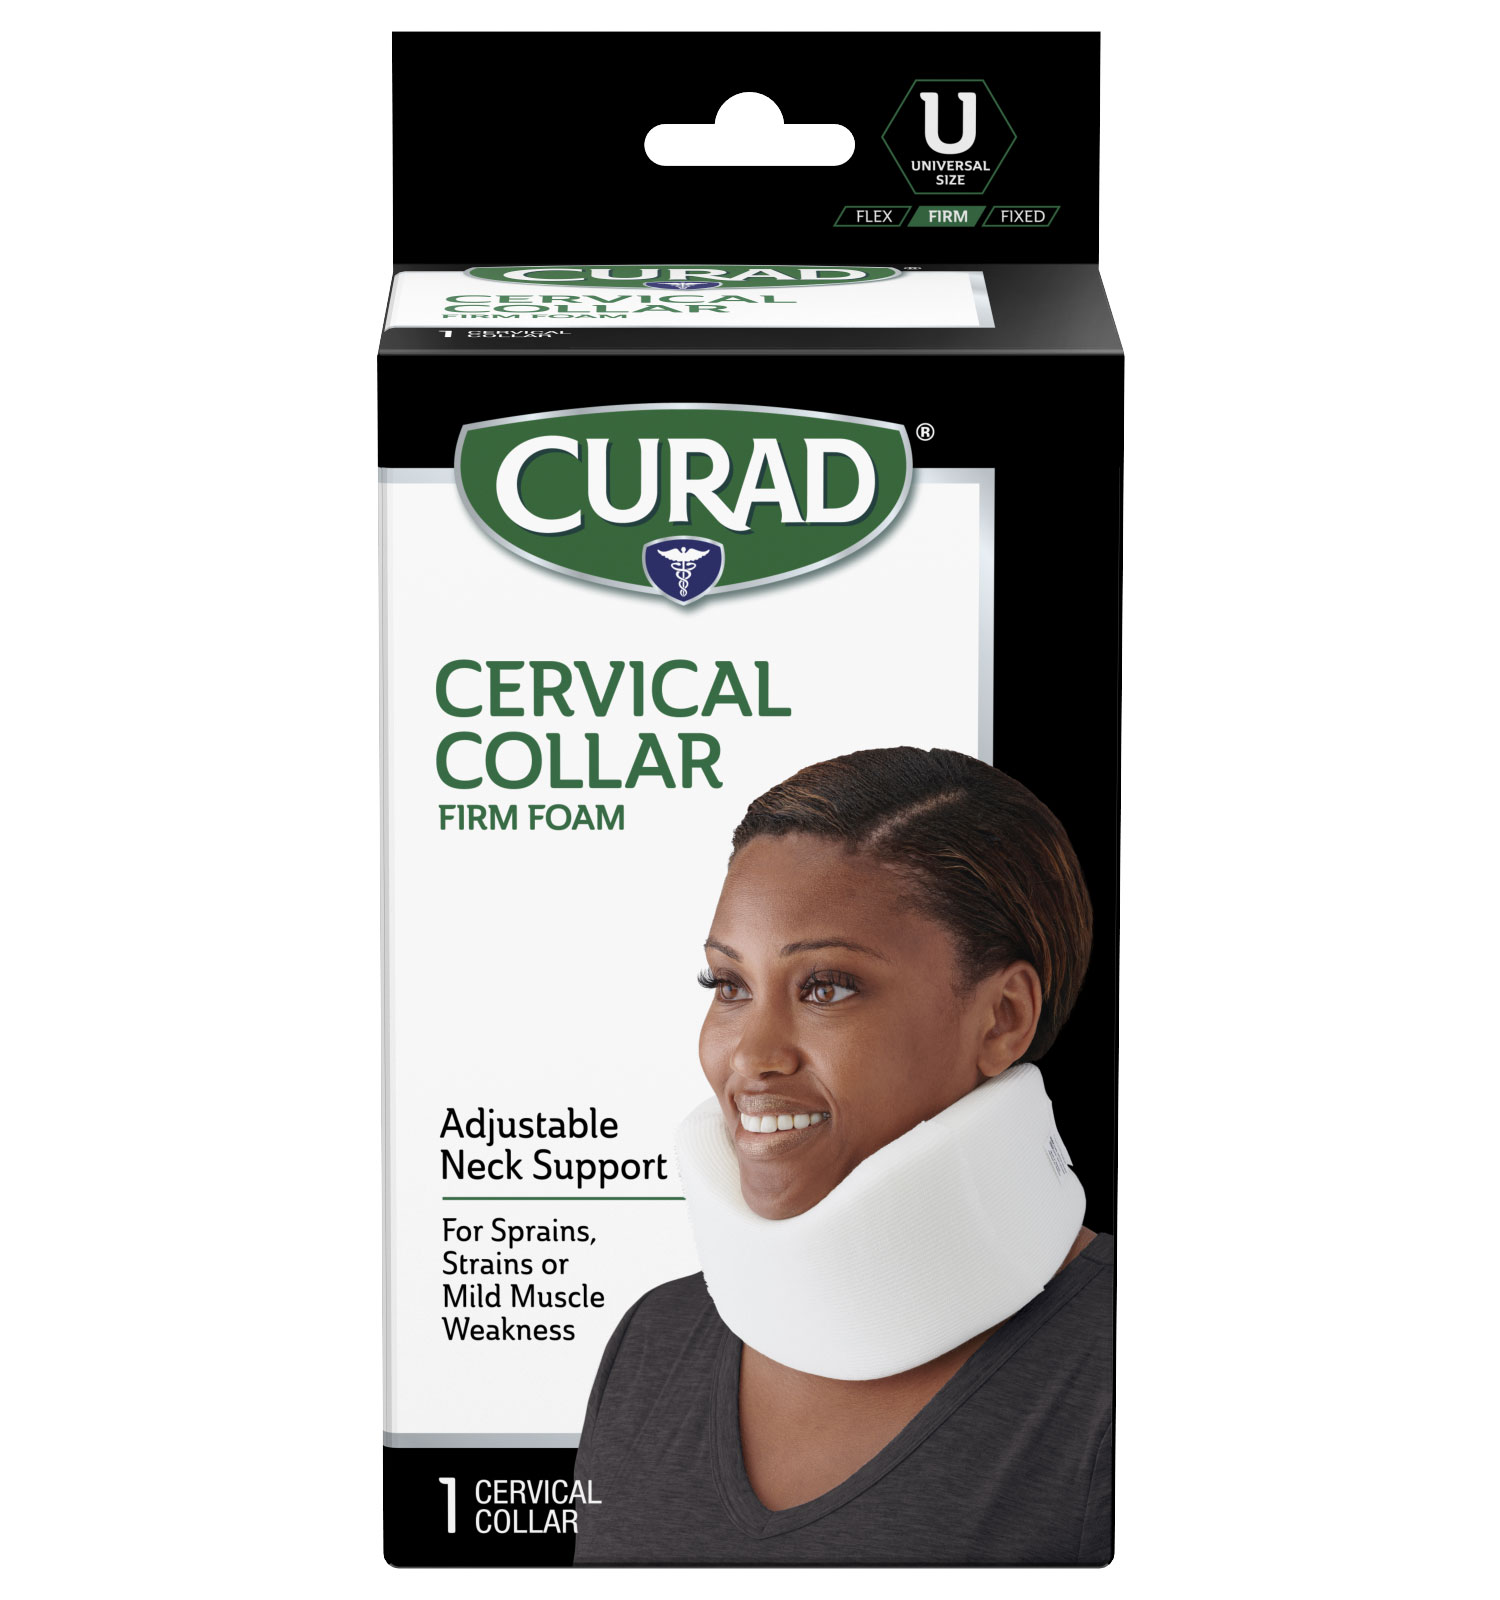 CURAD Cervical Collar, Firm Foam, Universal, 1 count